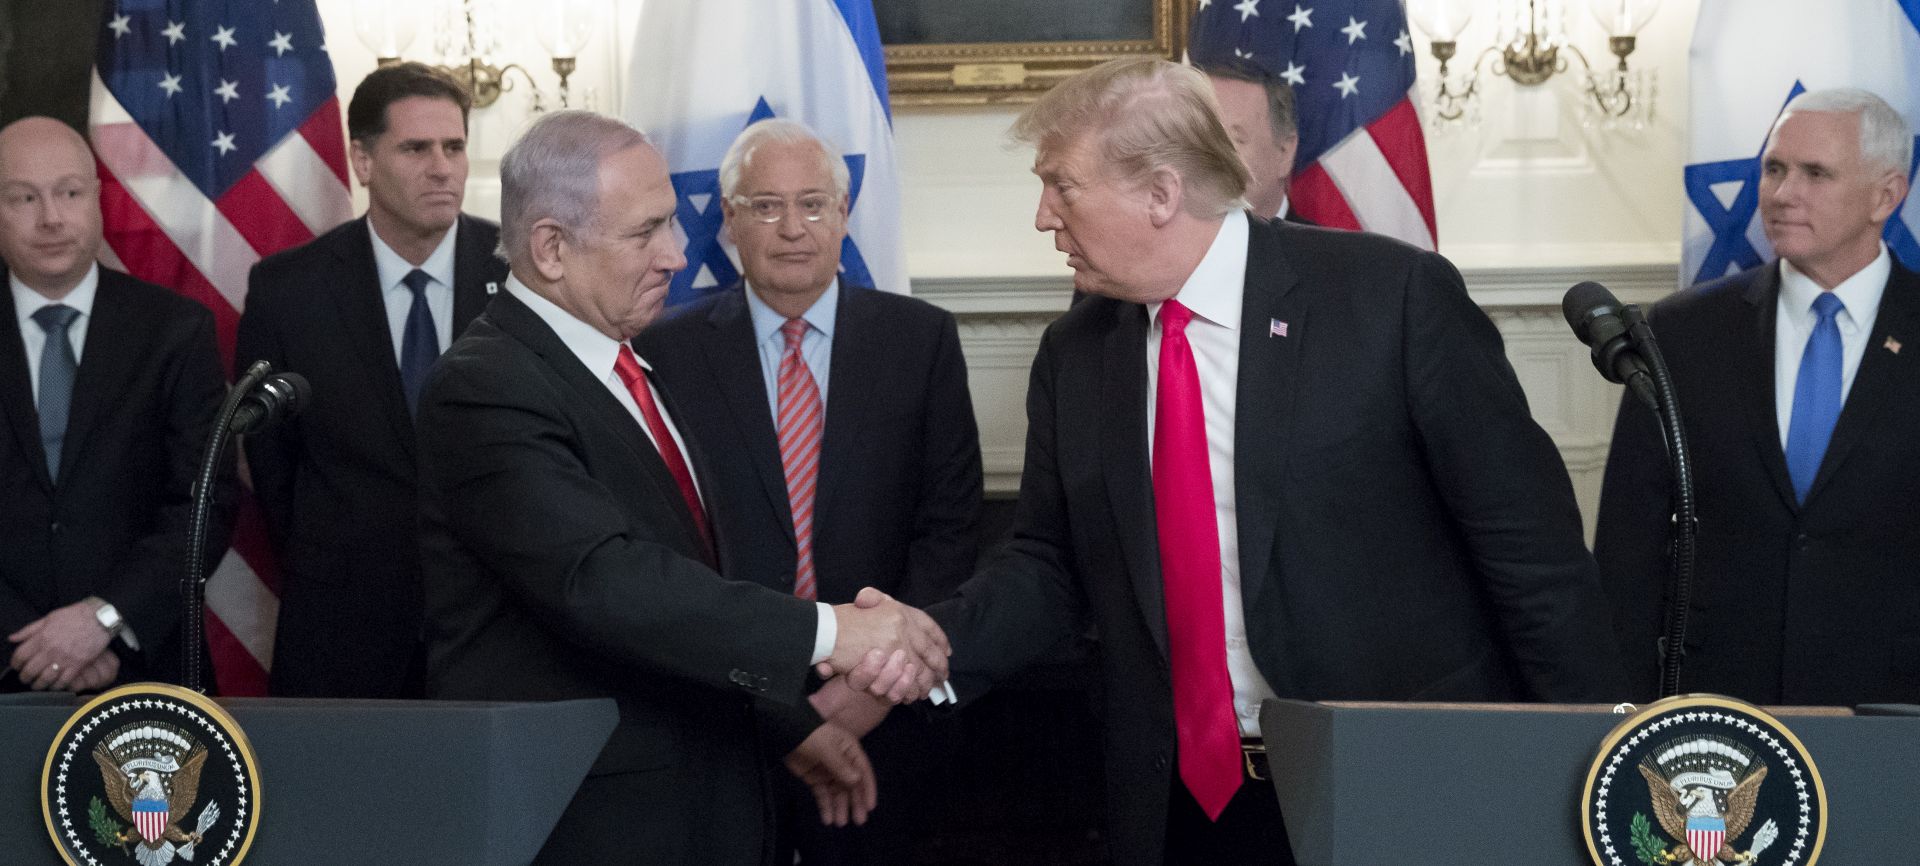 epa07462880 Prime Minister of Israel Benjamin Netanyahu (Front L) and US President Donald J. Trump (Front R) shake hands before Trump signed an order recognizing Golan Heights as Israeli territory, in the Diplomatic Reception Room of the White House in Washington, DC, USA, 25 March 2019.  EPA/MICHAEL REYNOLDS